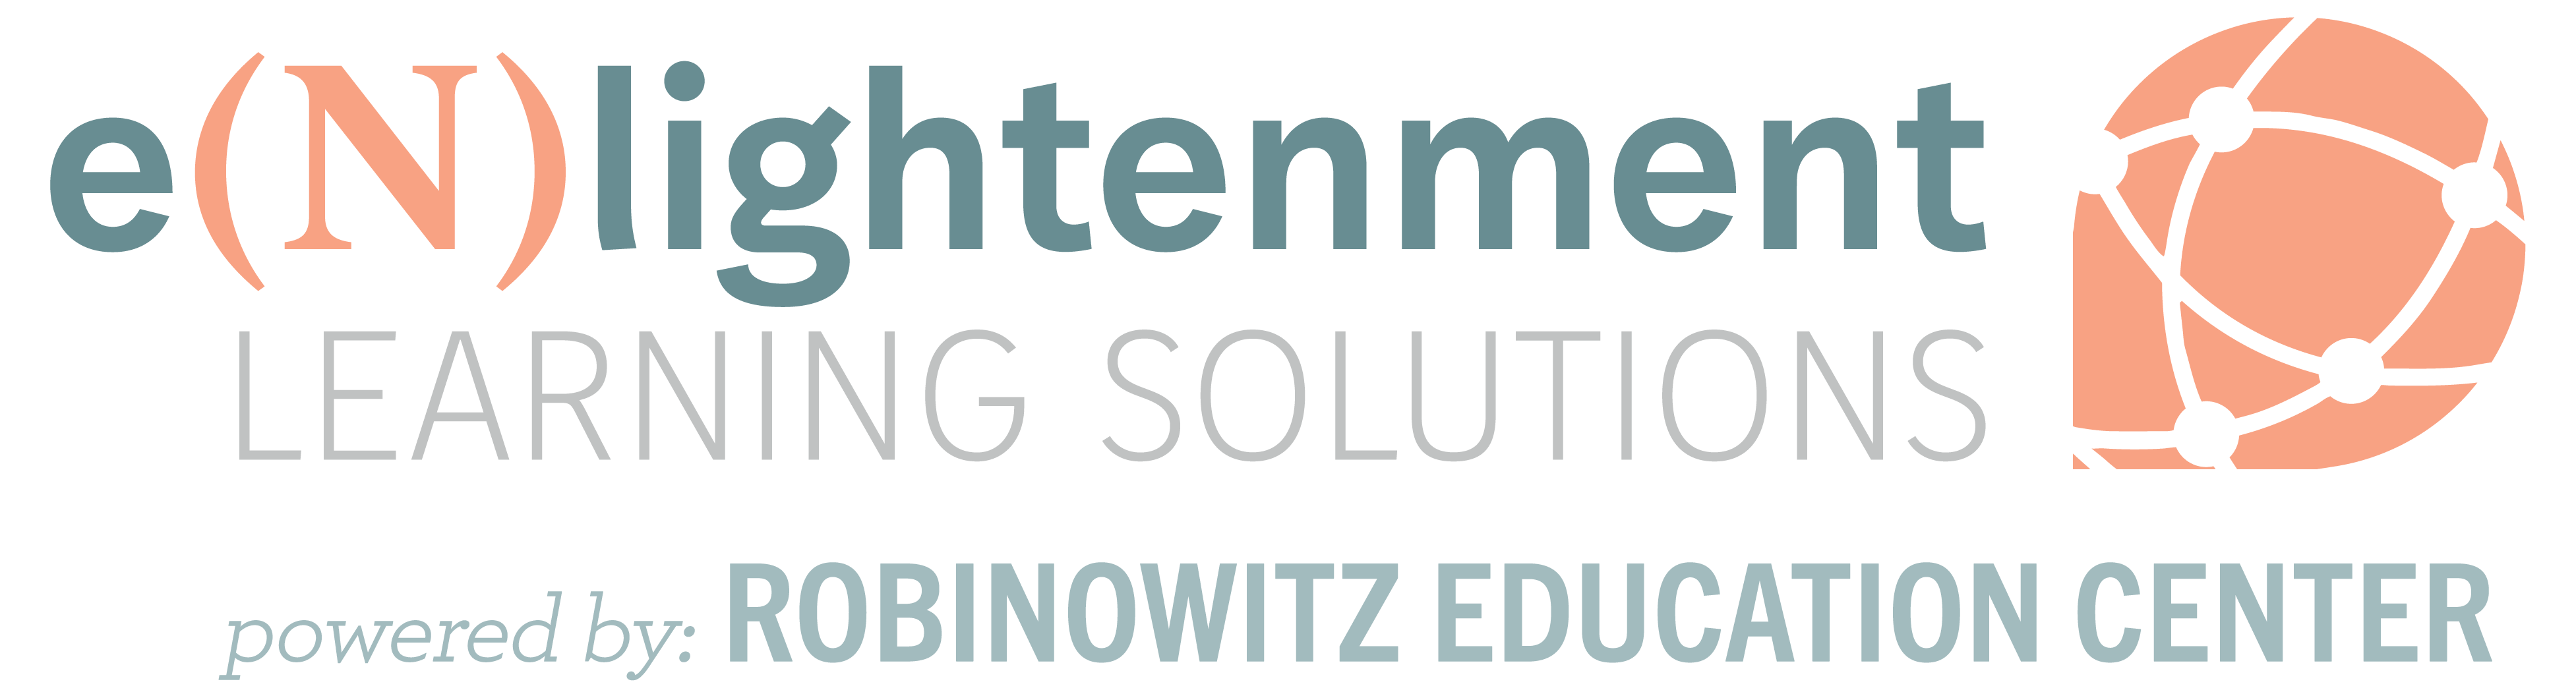 Enlightenment Learning Solutions